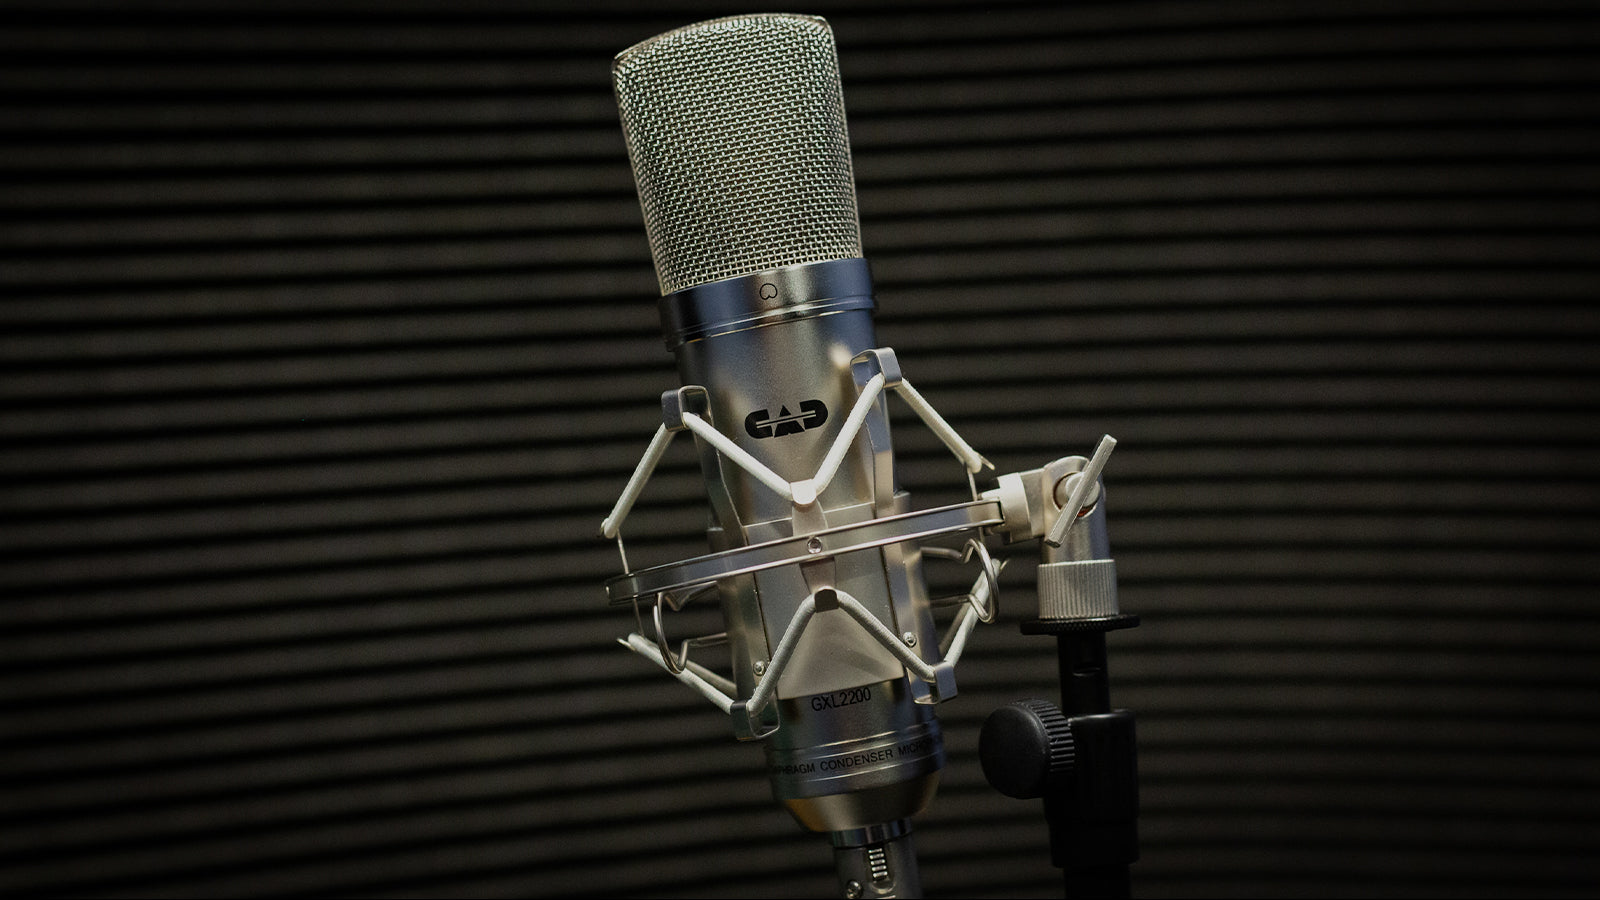 A CAD Audio microphone in a recording studio sound booth